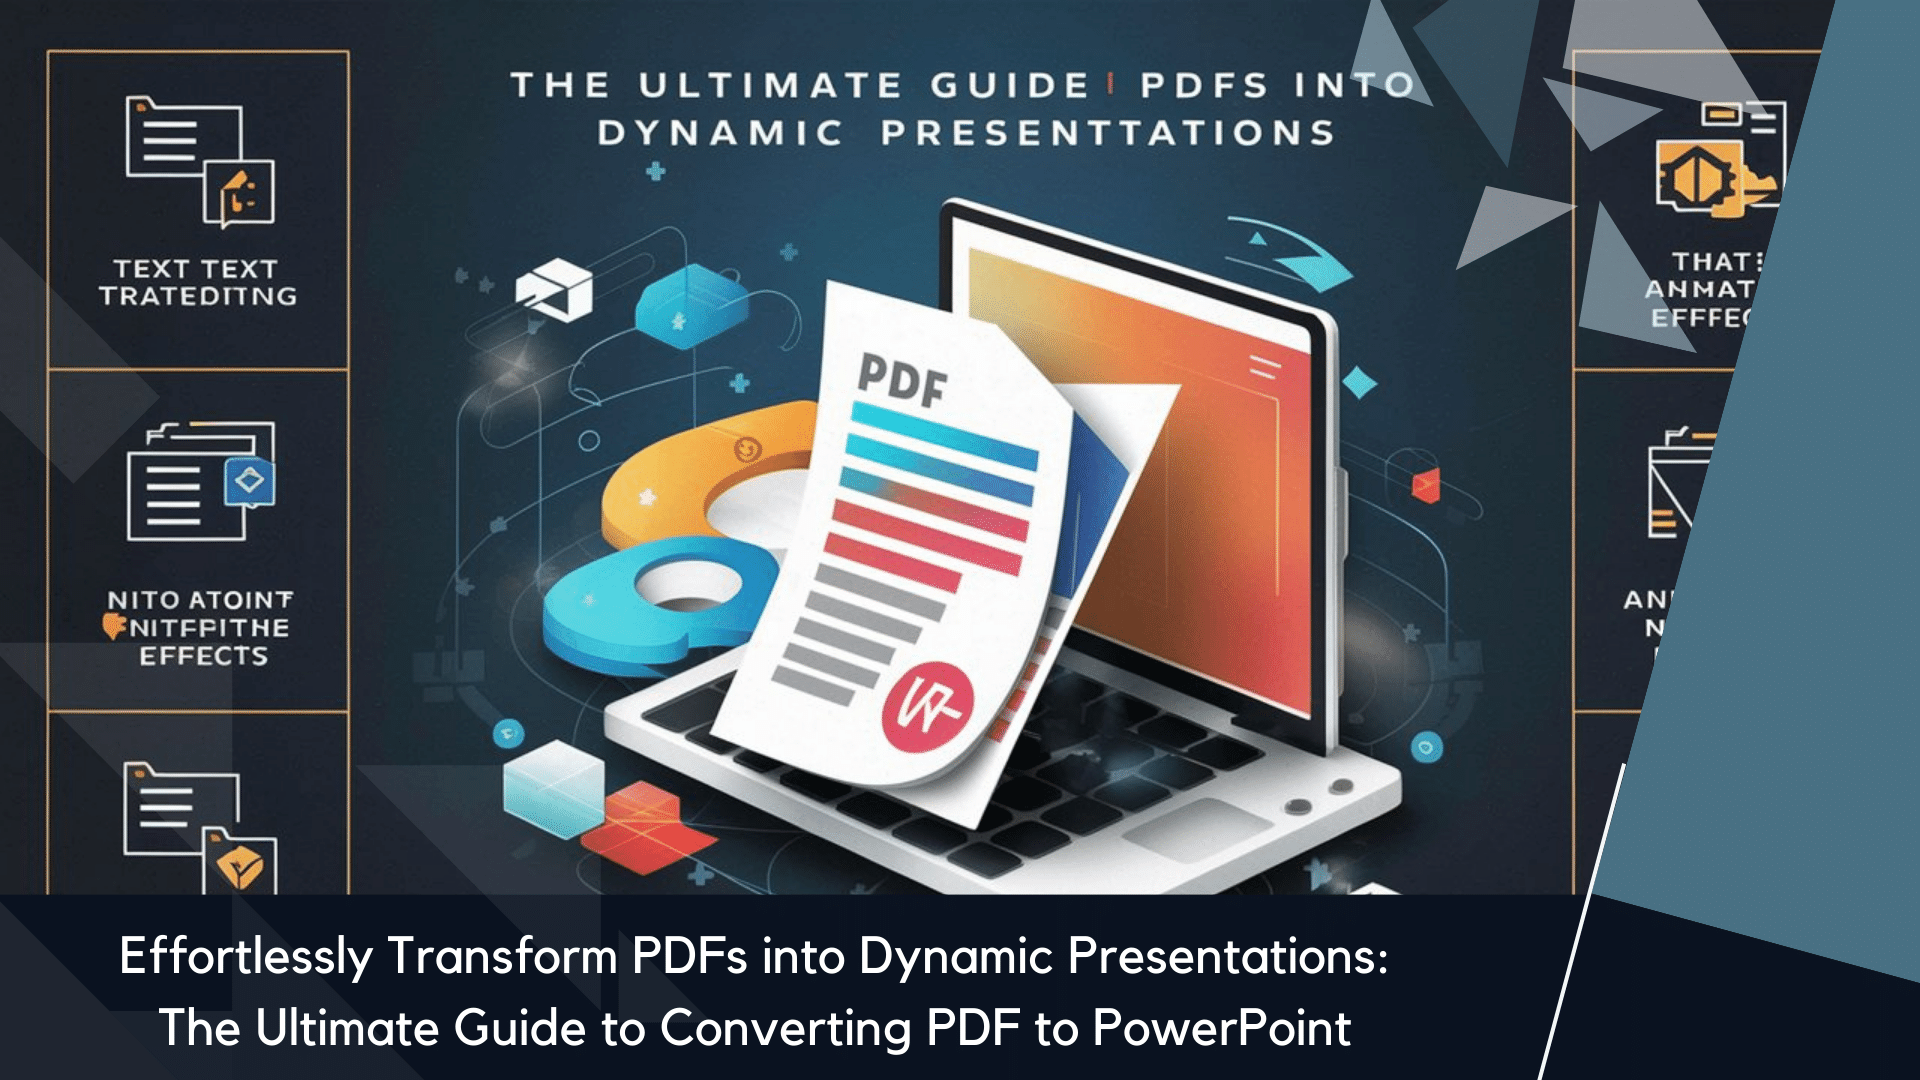 Effortlessly Transform PDFs into Dynamic Presentations The Ultimate Guide to Converting PDF to PowerPoint